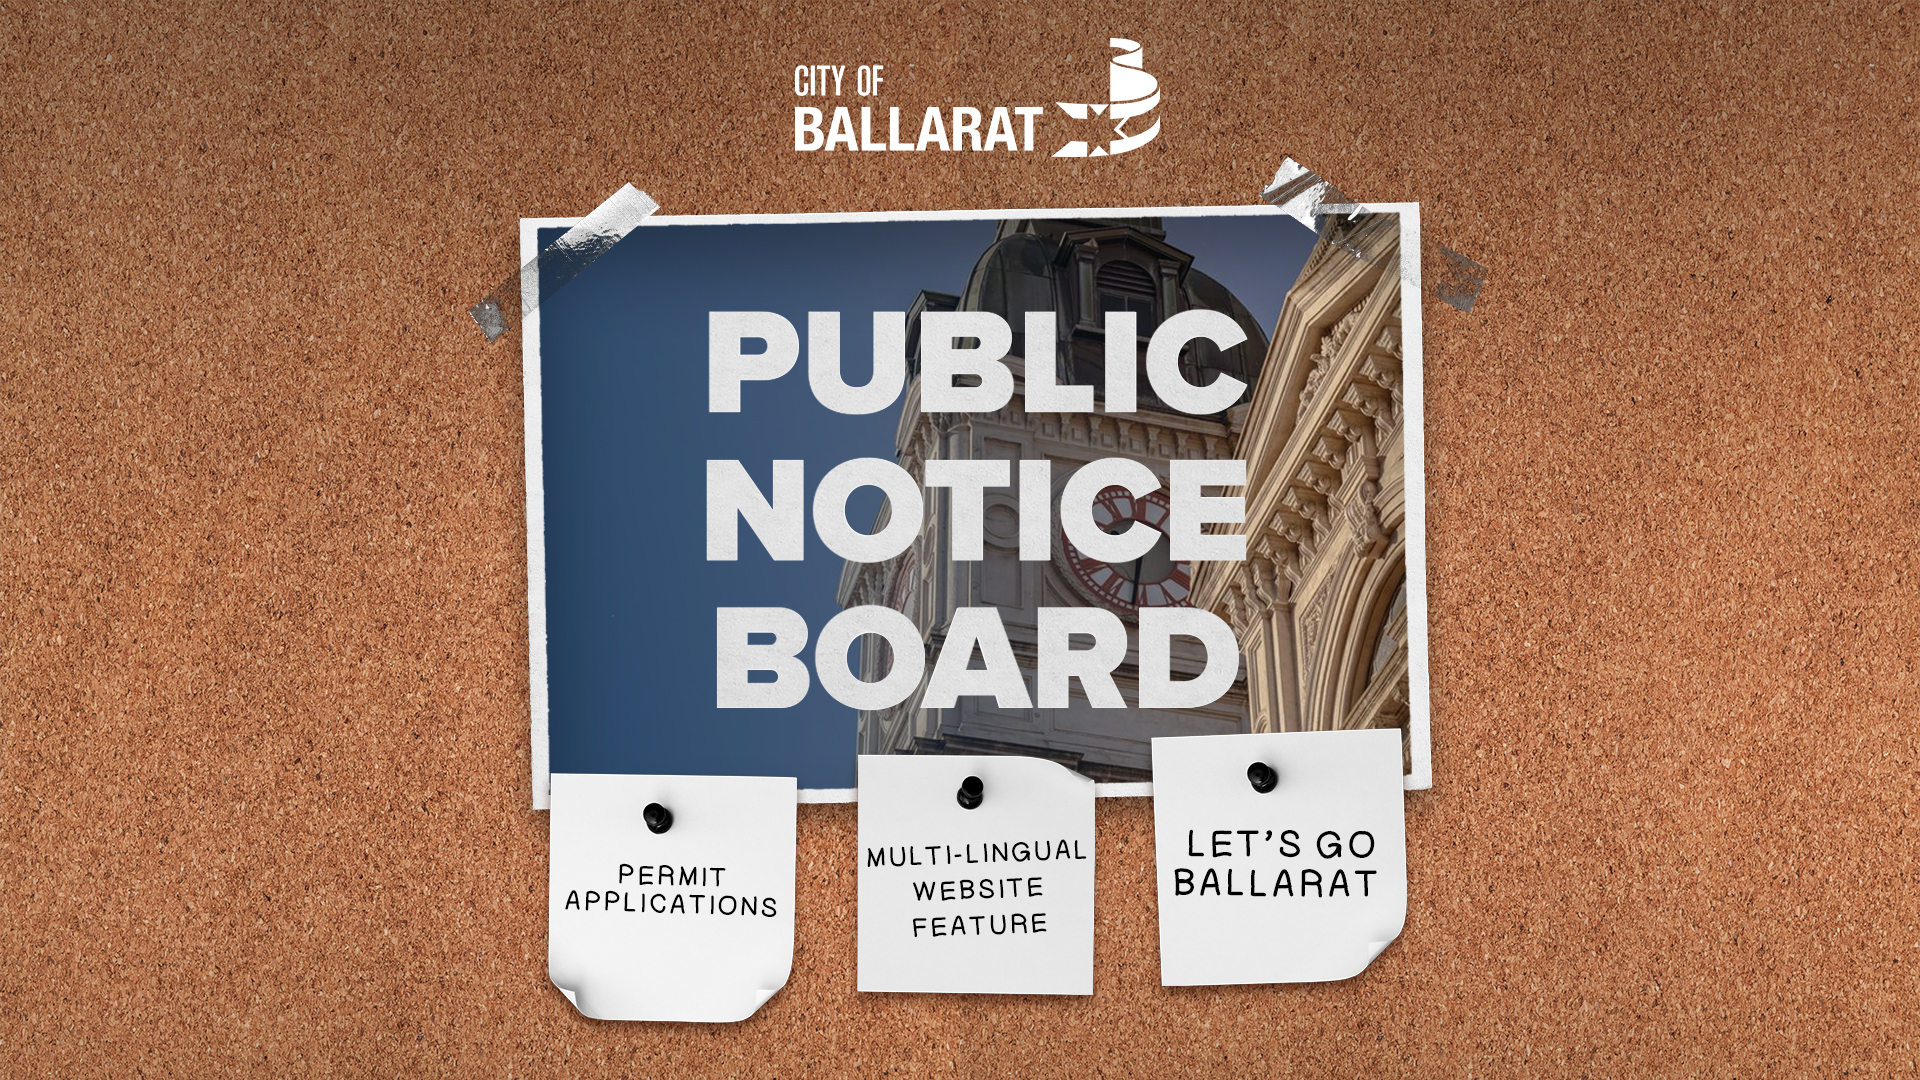 Notice board with Public Notice Board text over an image of Ballarat Town Hall. Three notes underneath with text saying PERMIT APPLICATIONS, MULTI-LINGUAL WEBSITE FEATURE, LET'S GO BALLARAT